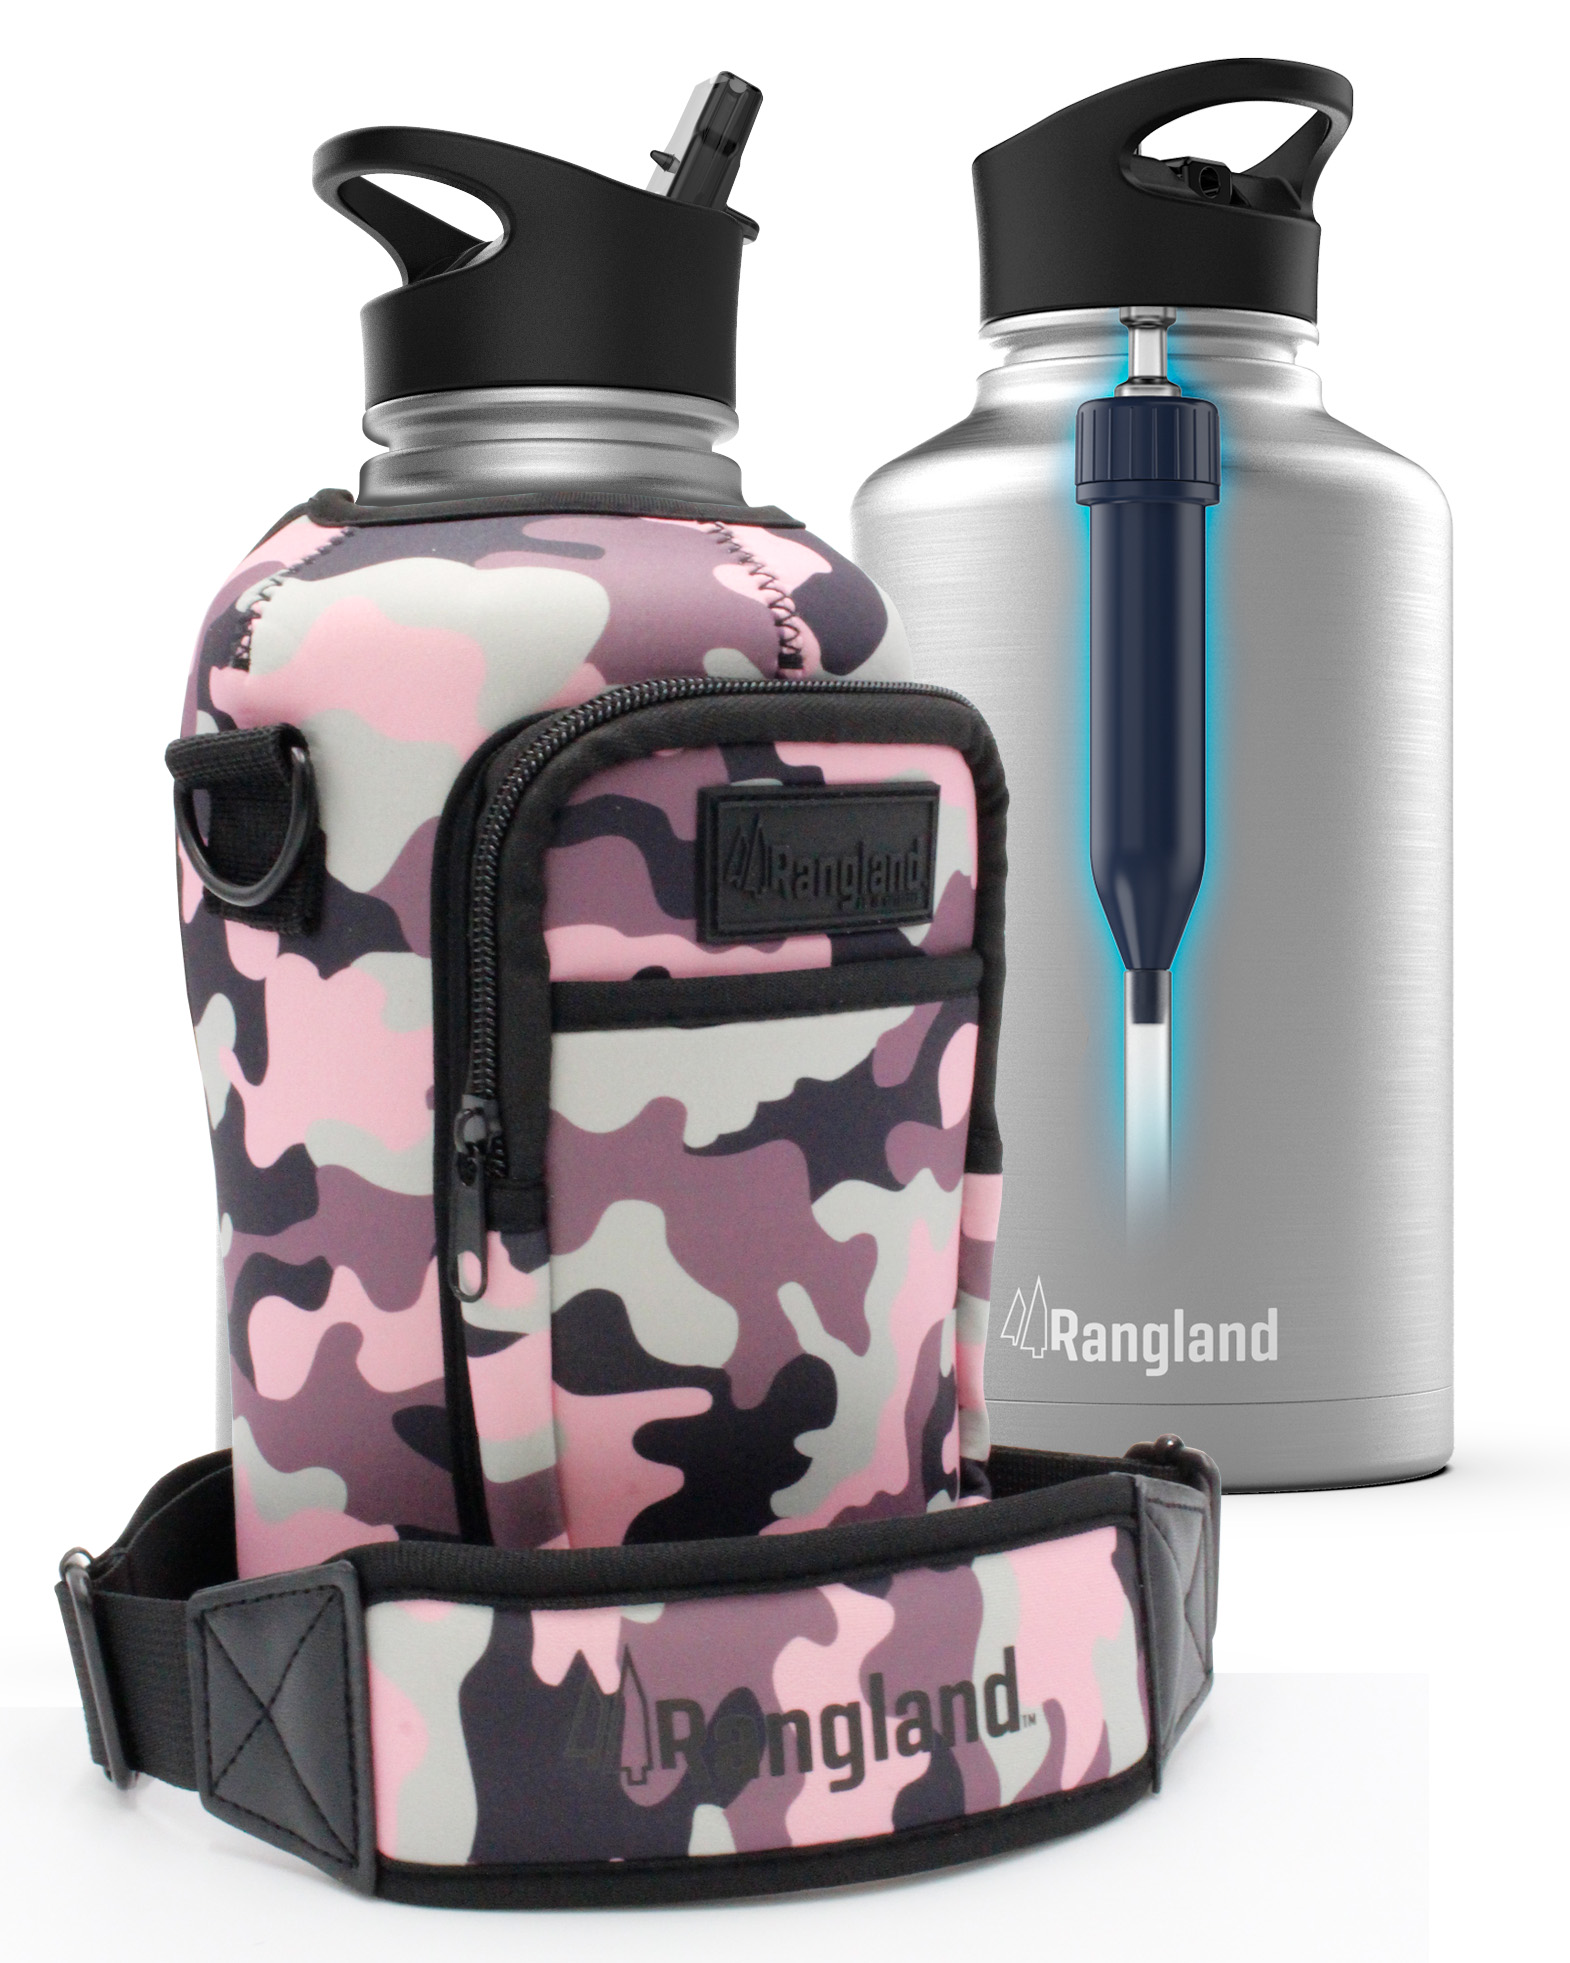 Rangland Filtered Half Gallon Water Bottle with Straw Lid & Carrying Strap